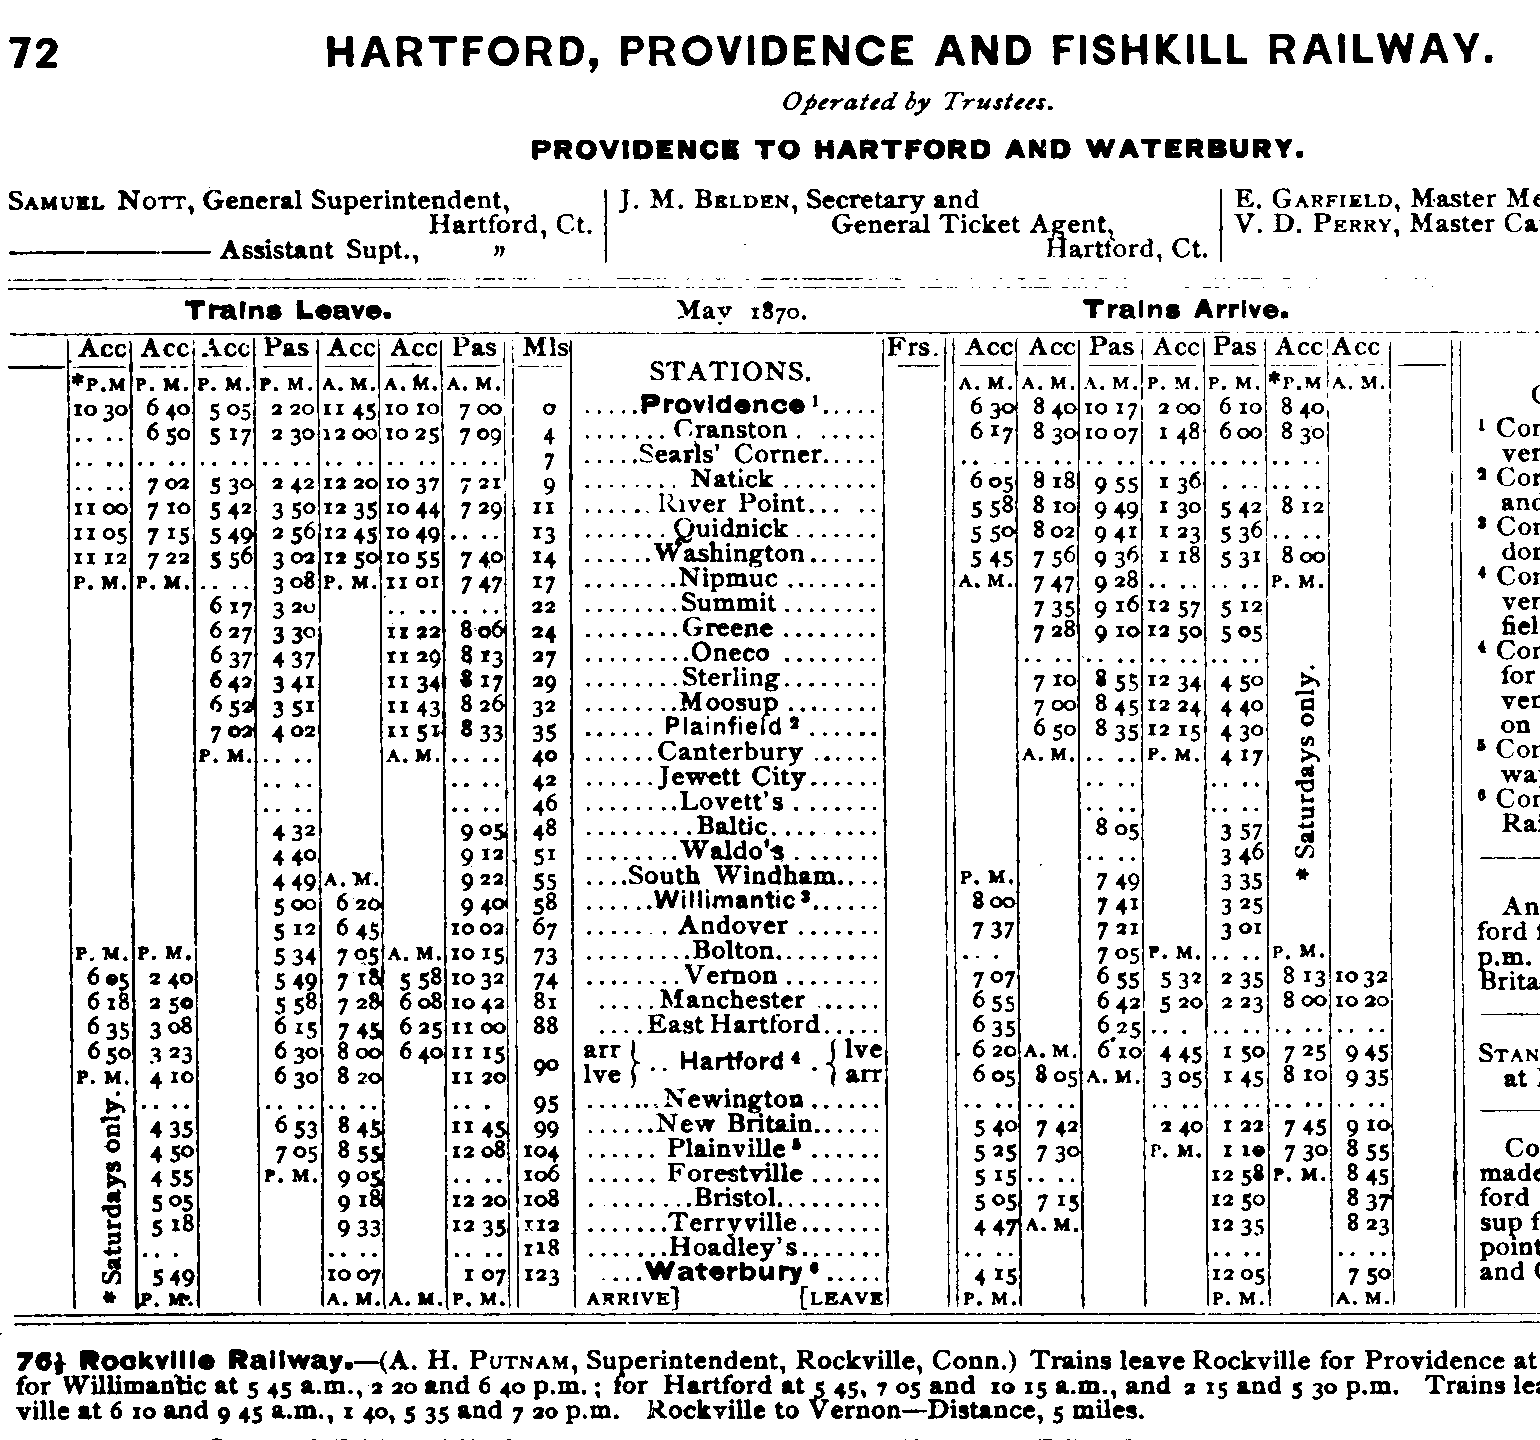 A 19th Century Timetable of the Hartford, Providence, and Fishkill Rwy